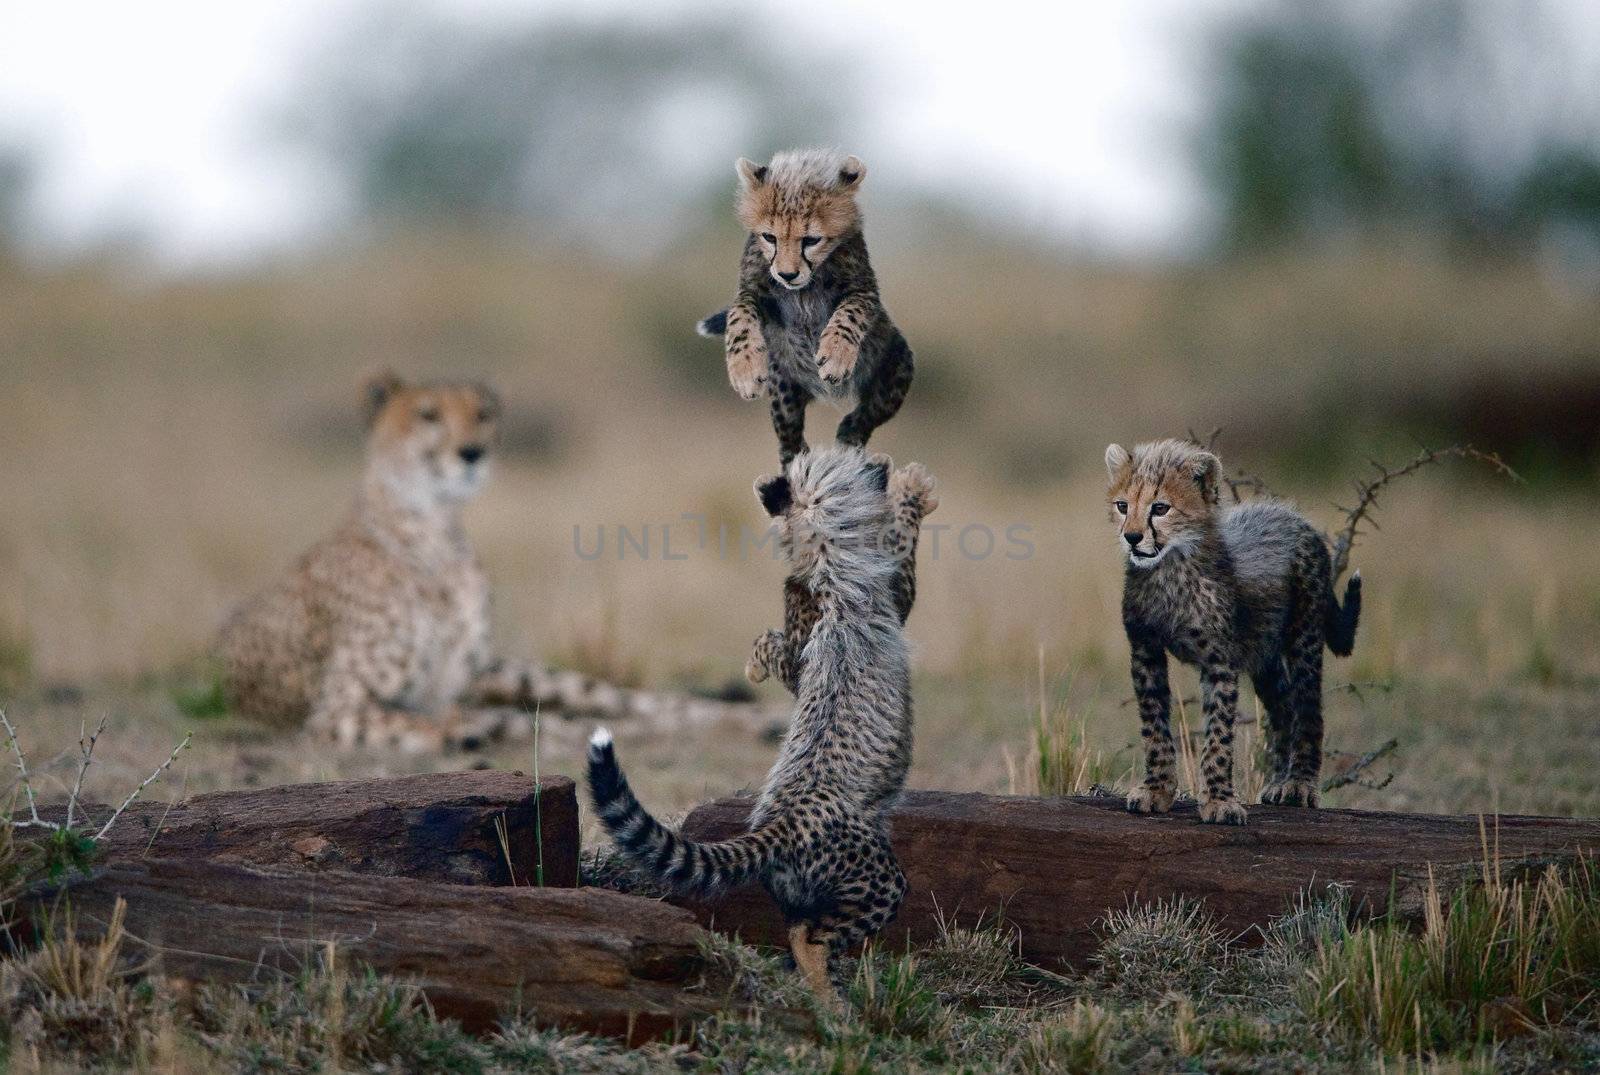 Small kittens of a cheetah play leapfrog on supervision of mum.